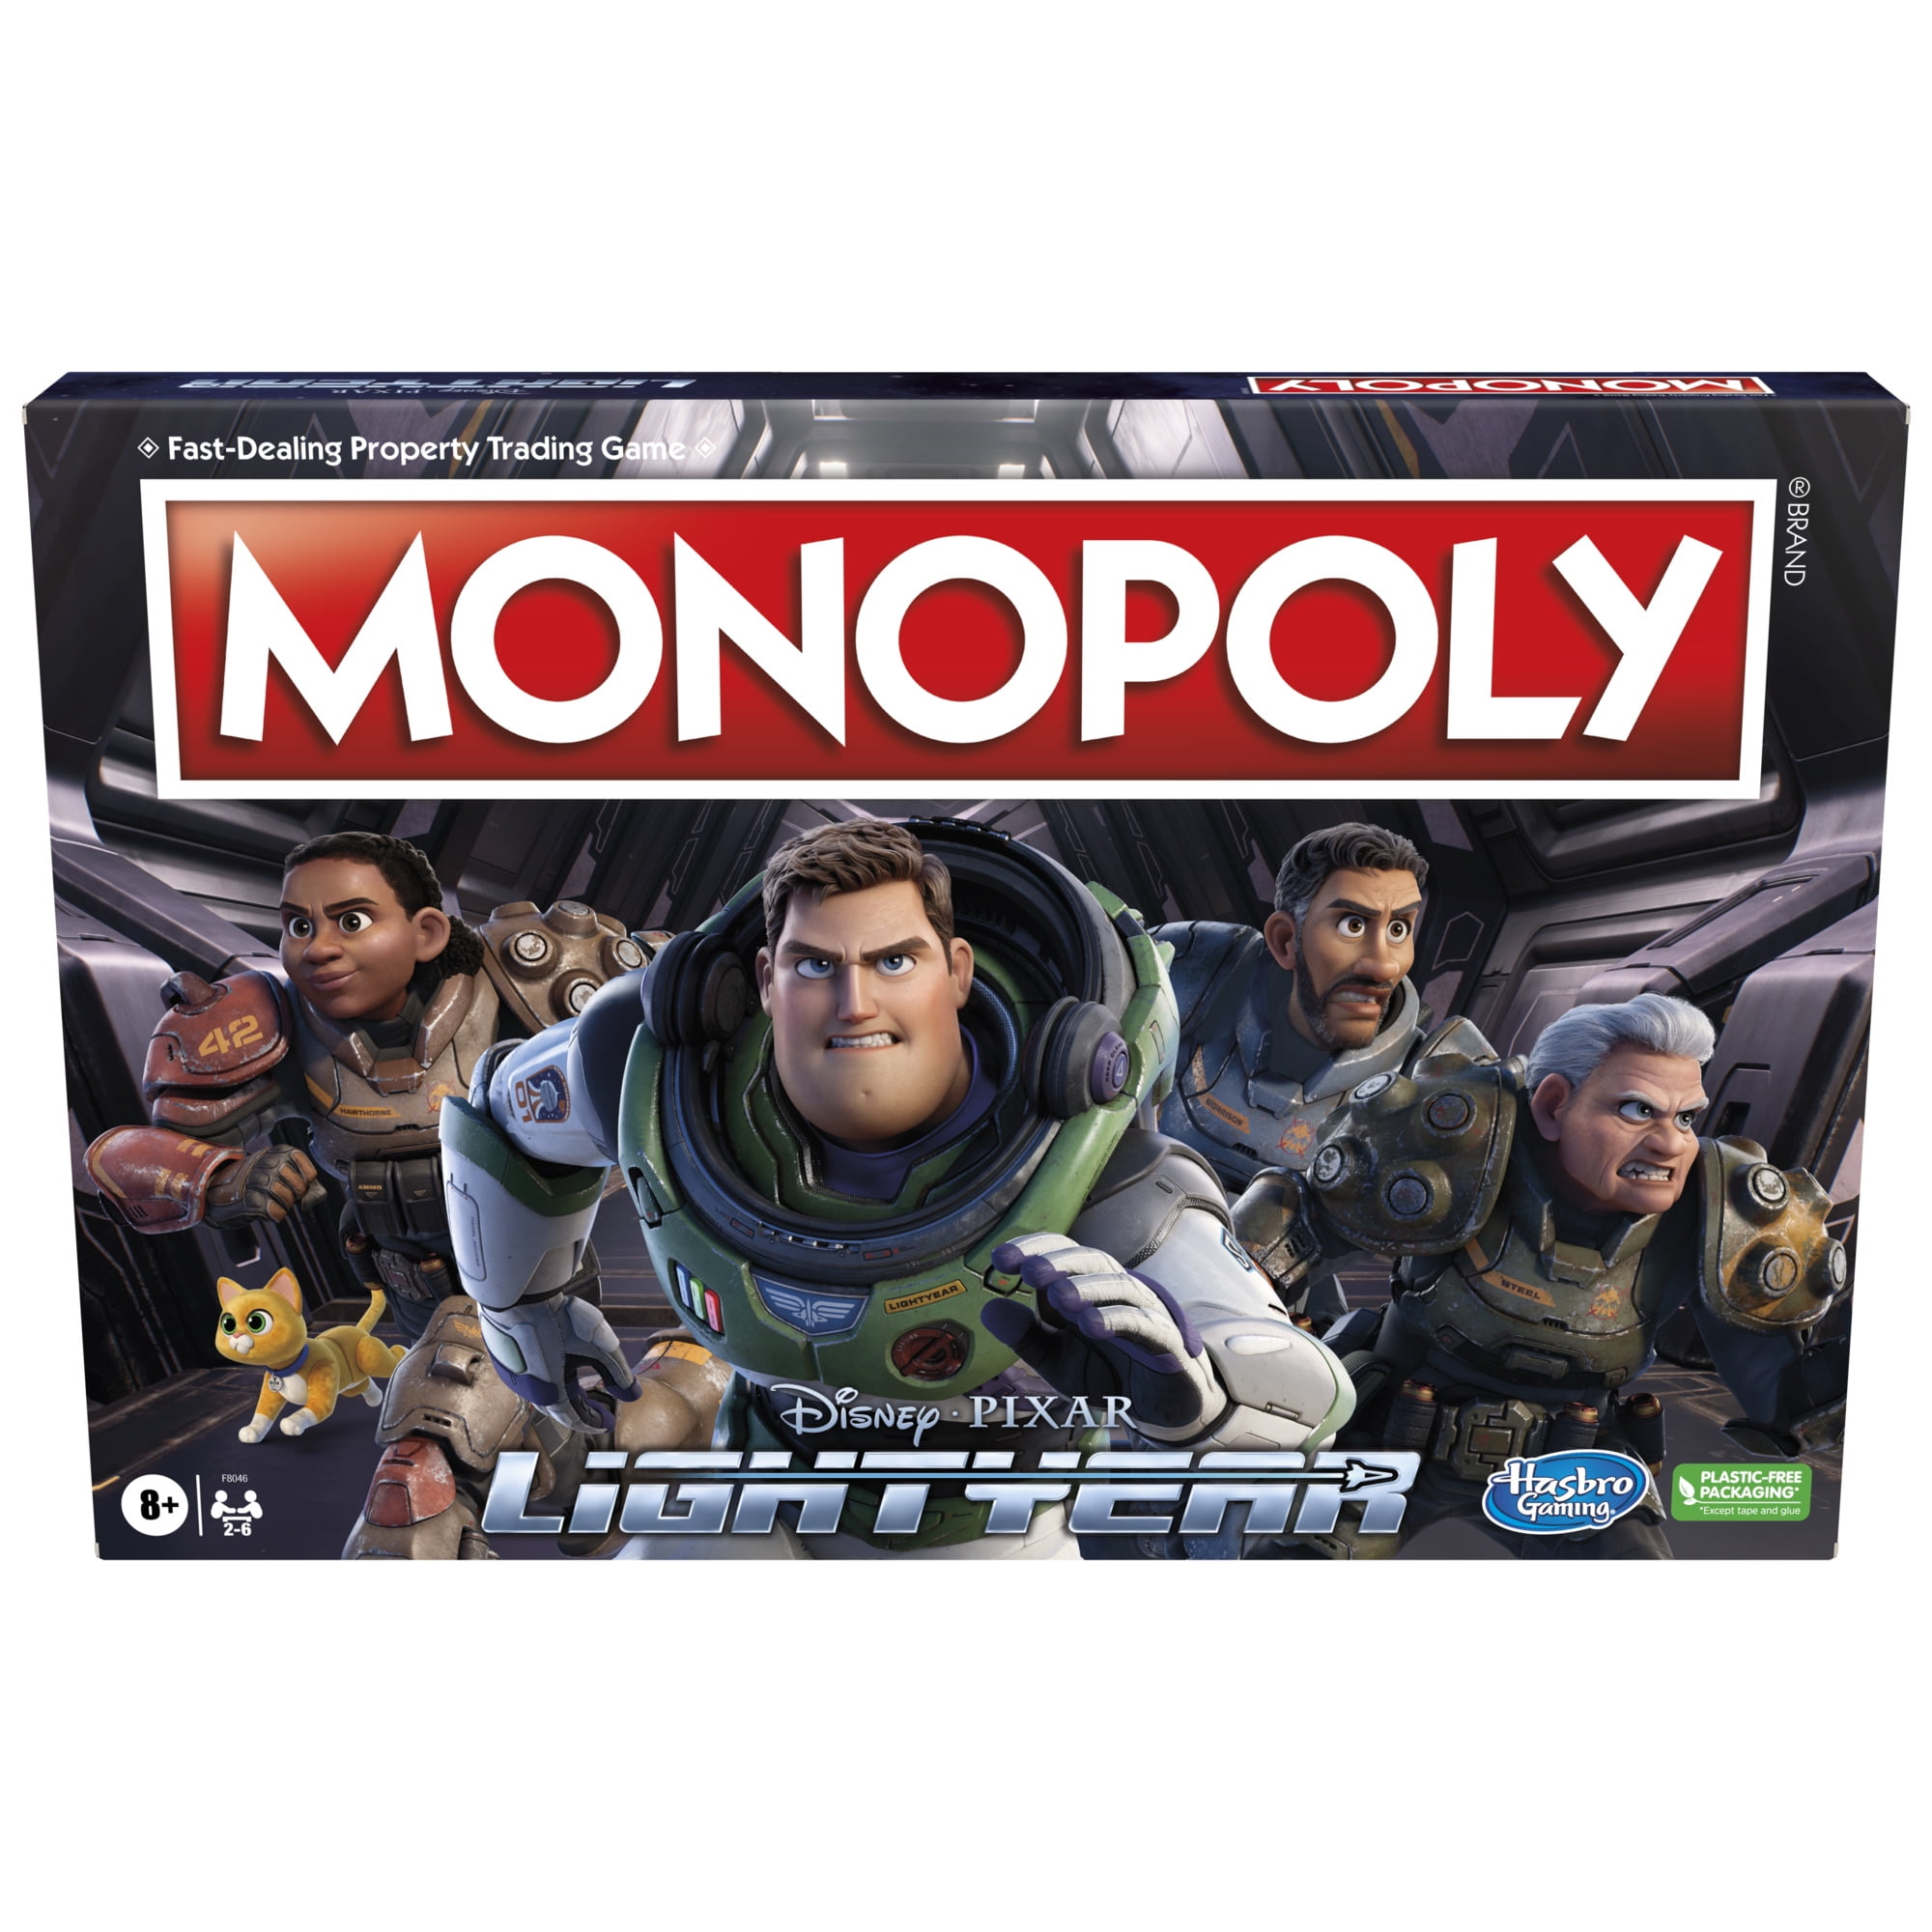 Monopoly Disney and Pixar's Lightyear Edition Board Game $5.41